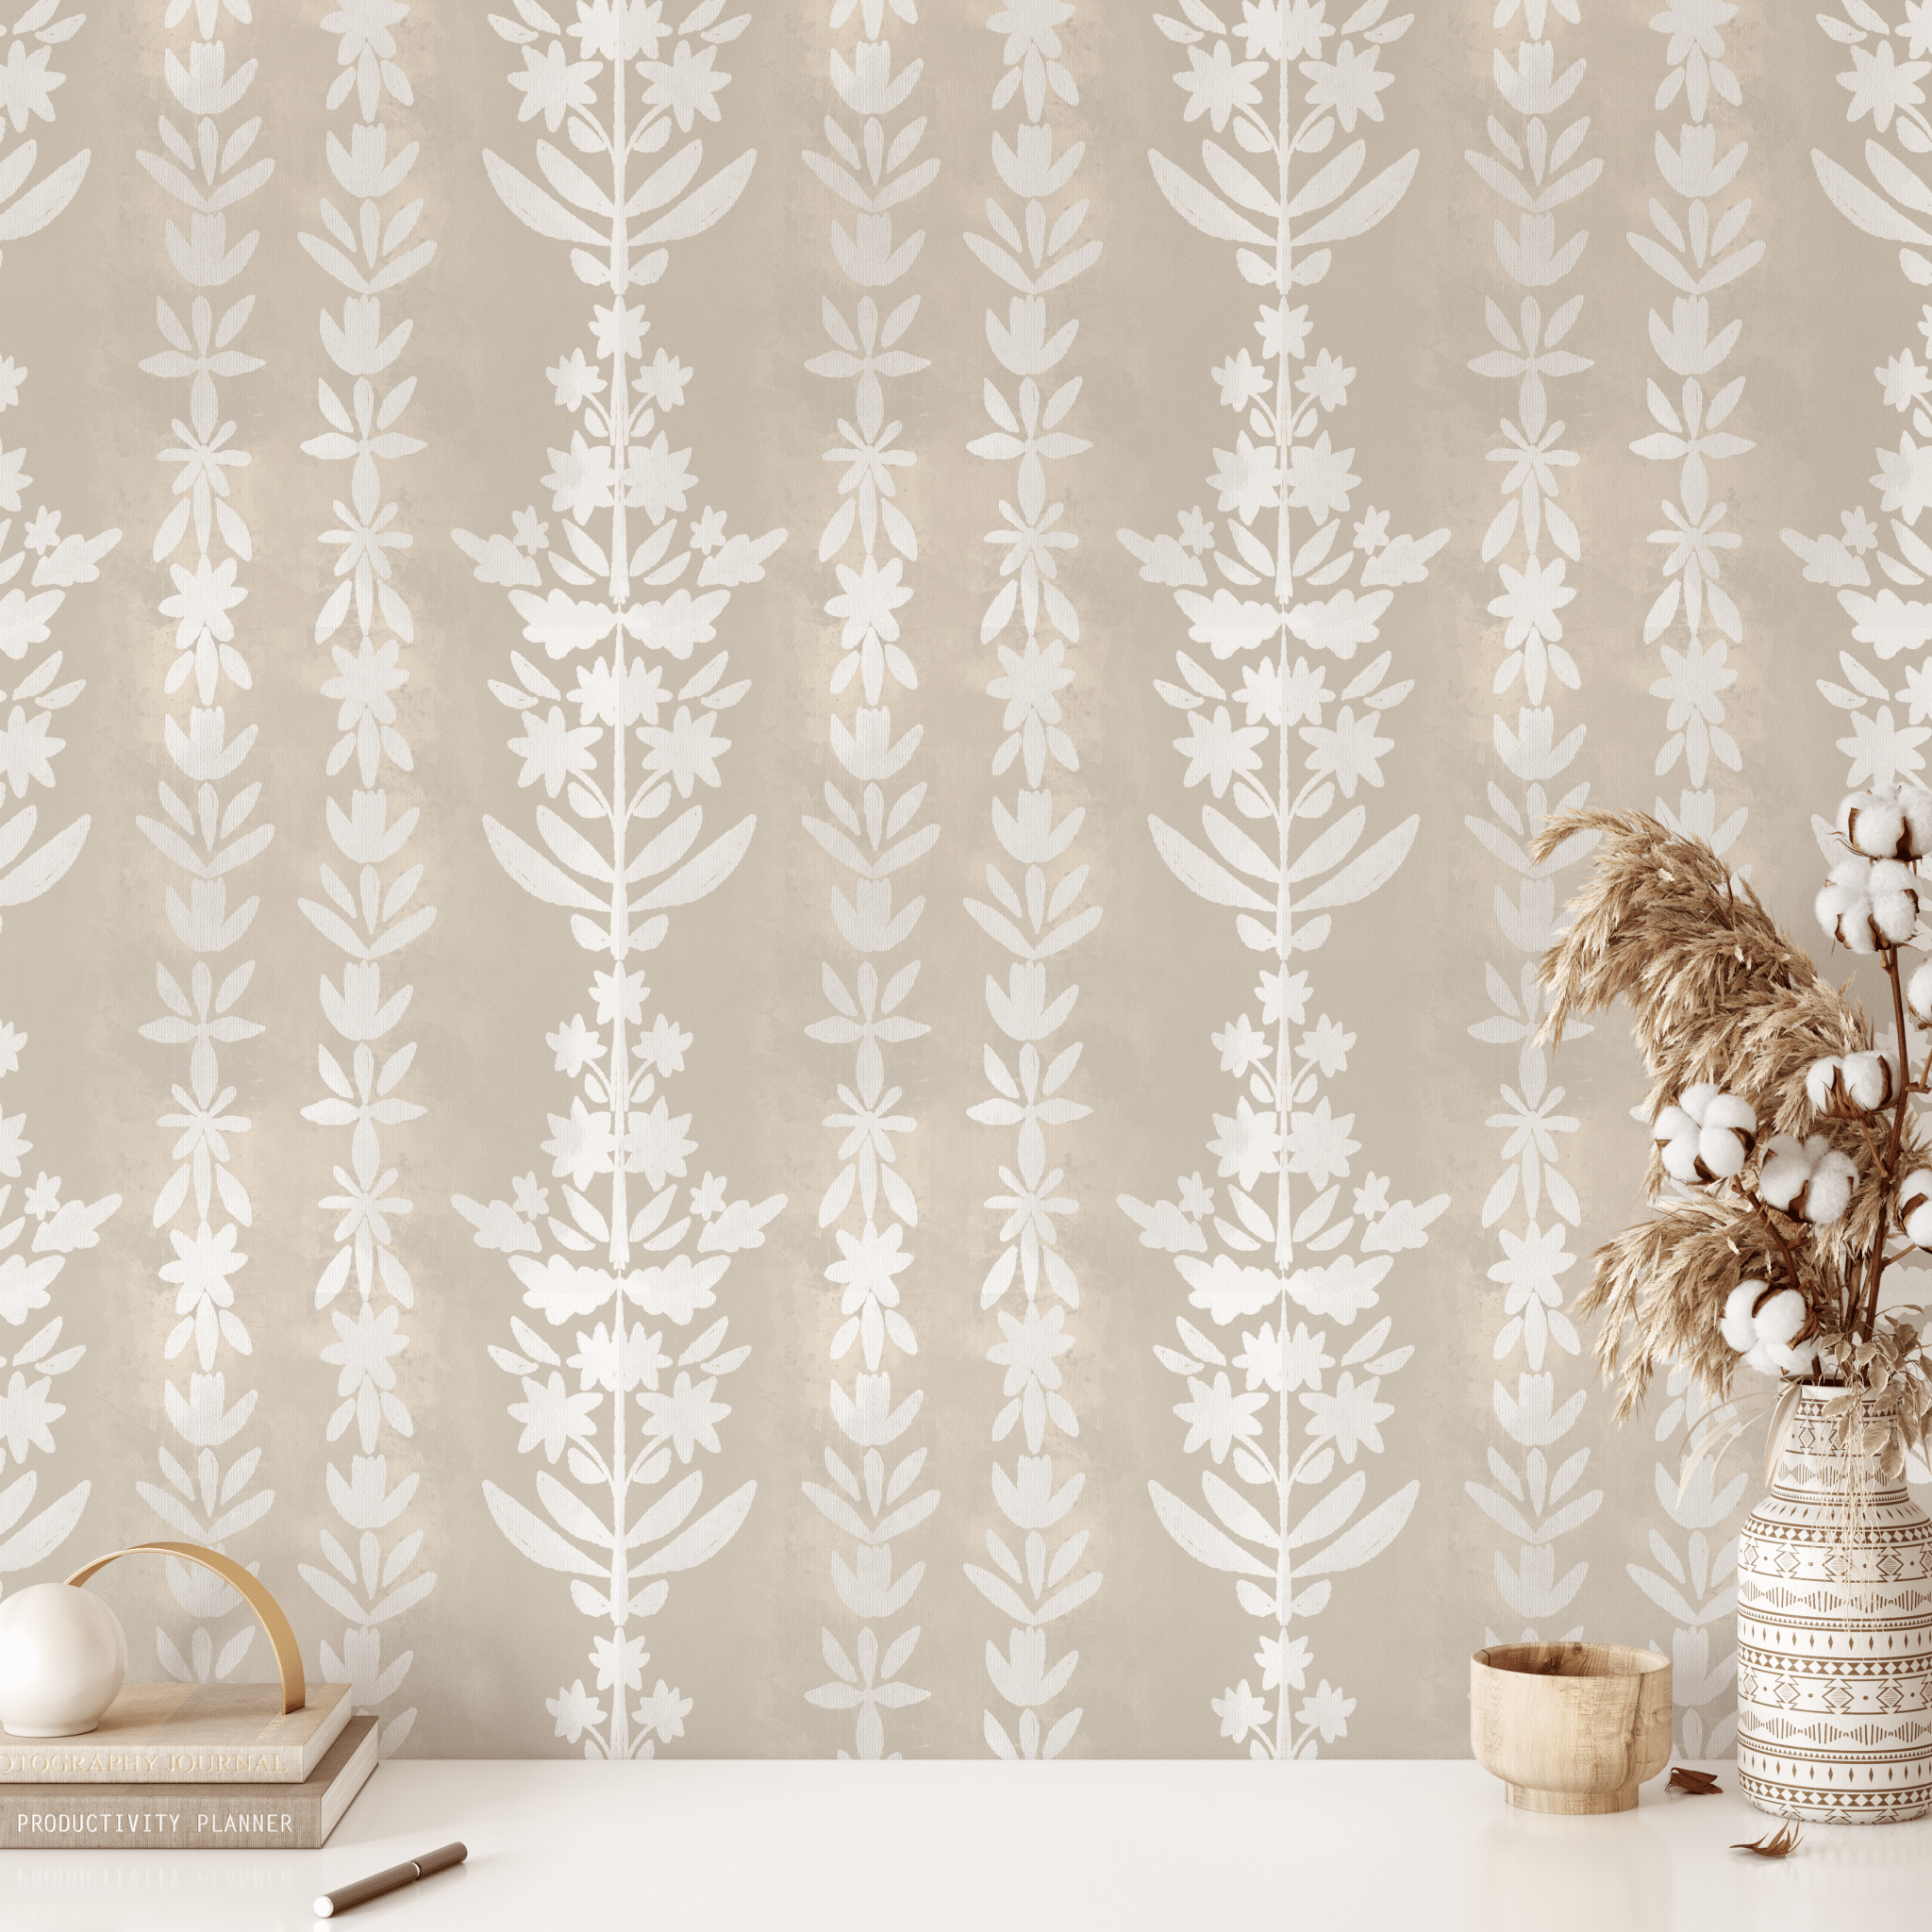 Earthy tone wallpaper self adhesive with natural bohemian inspired decor